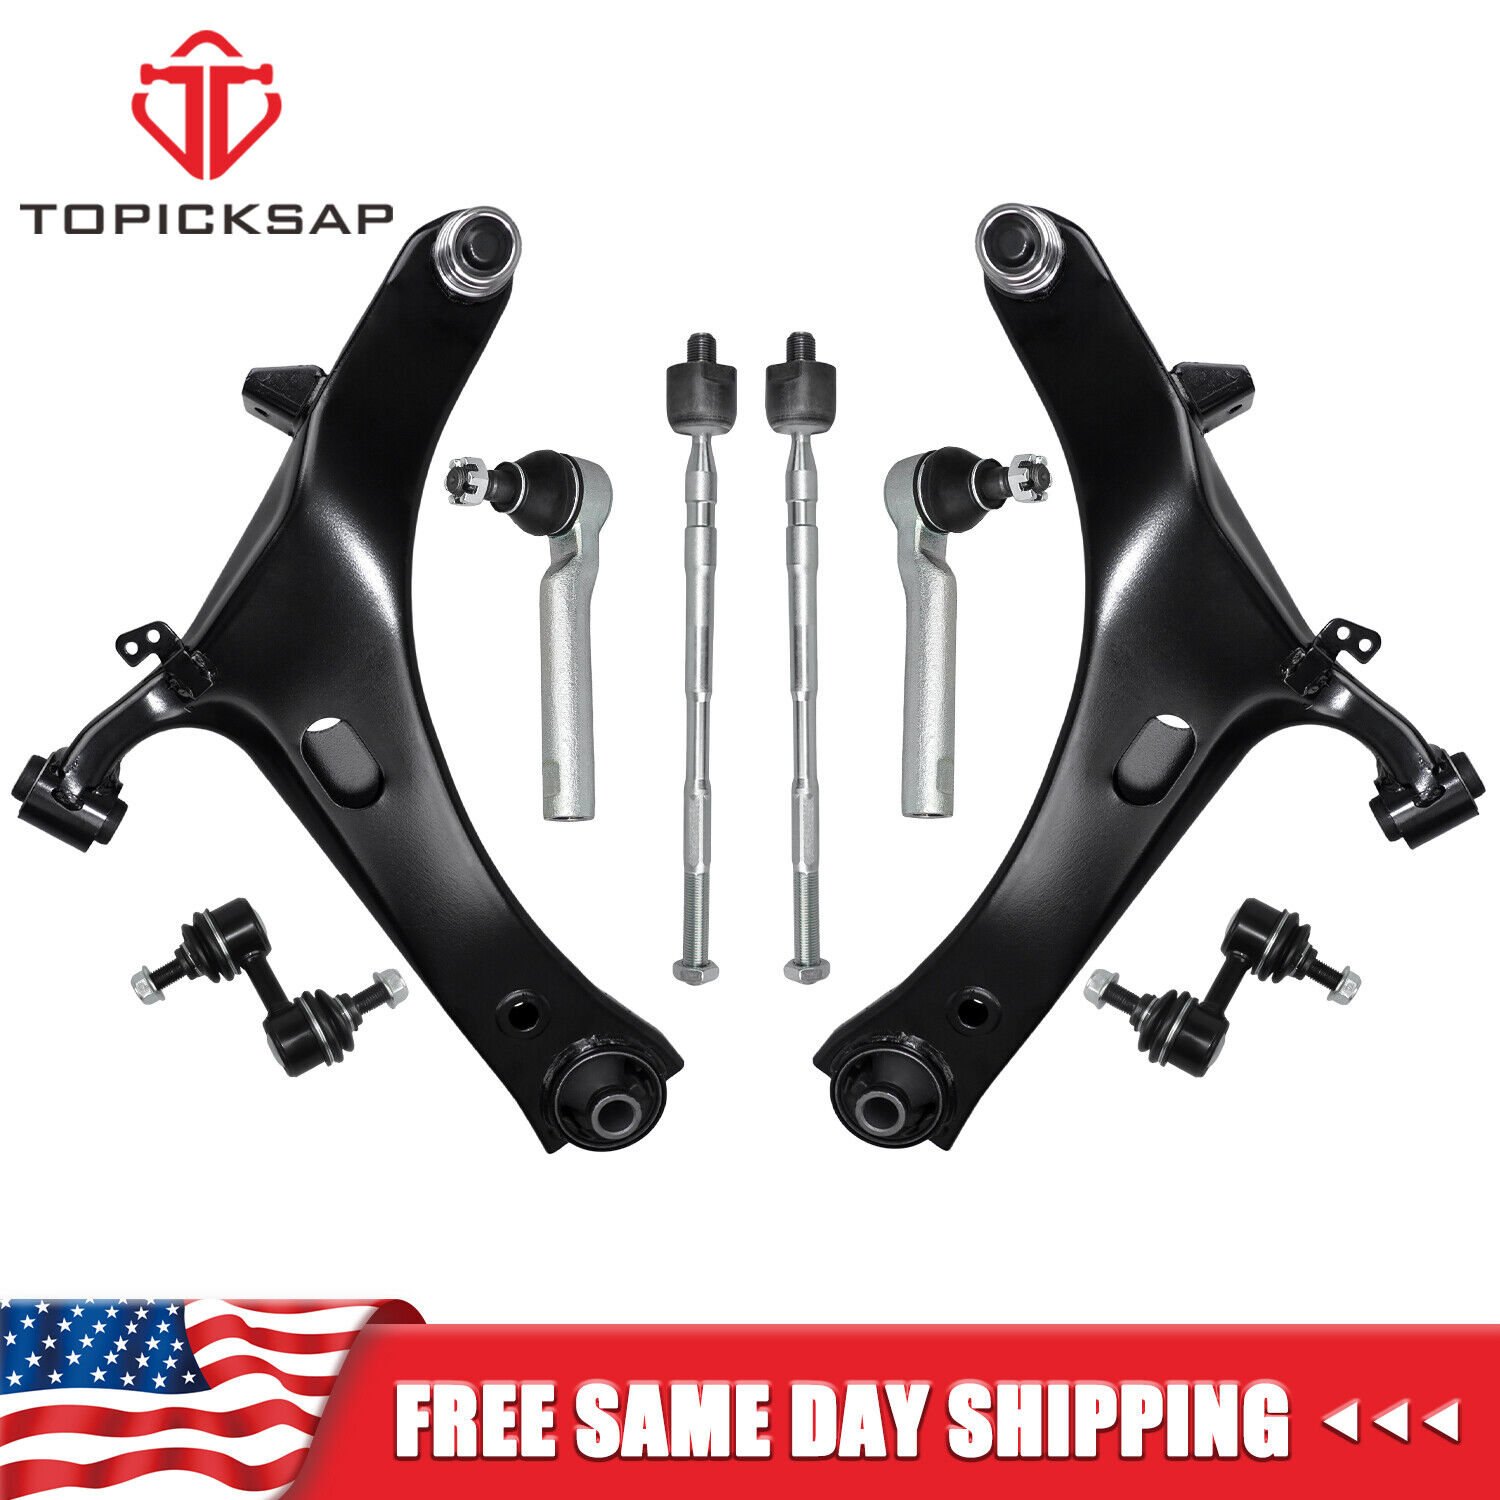 8pc Front Lower Control Arms Tie Rods Sway Bar Links for 2005-2009 Subaru Legacy